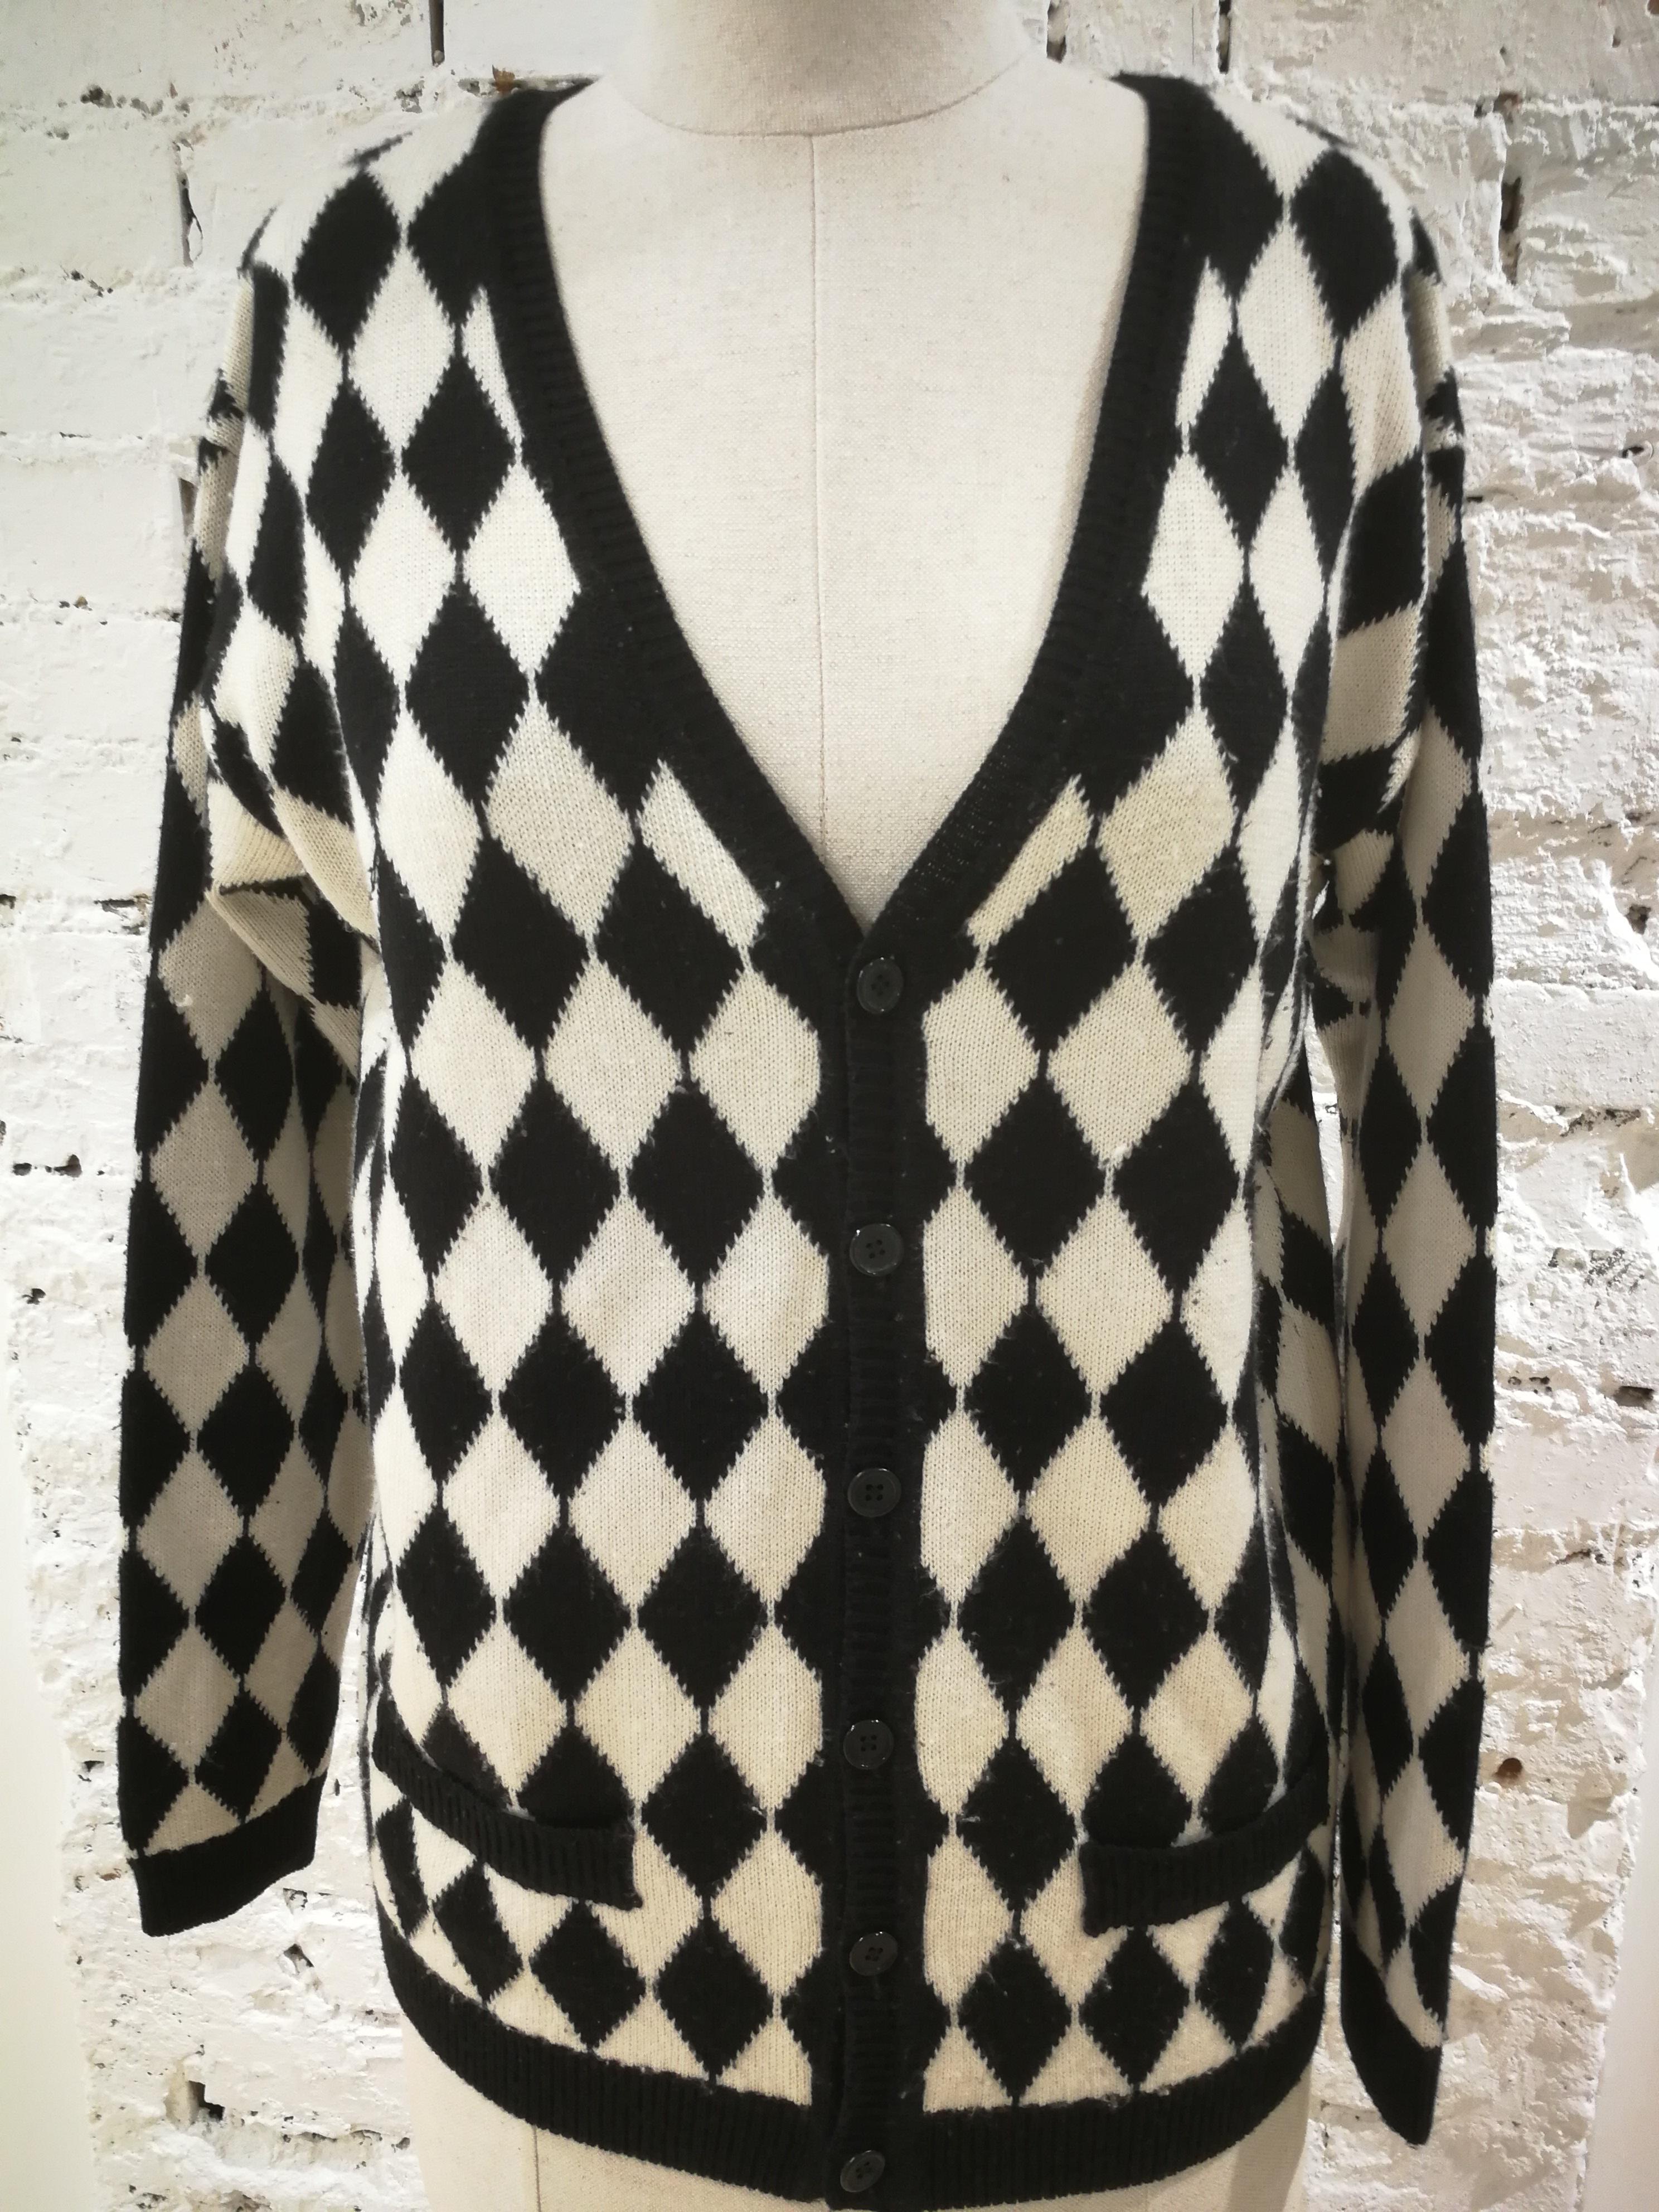 Versace Black & White wool Cardigan

totally made in italy in size M 